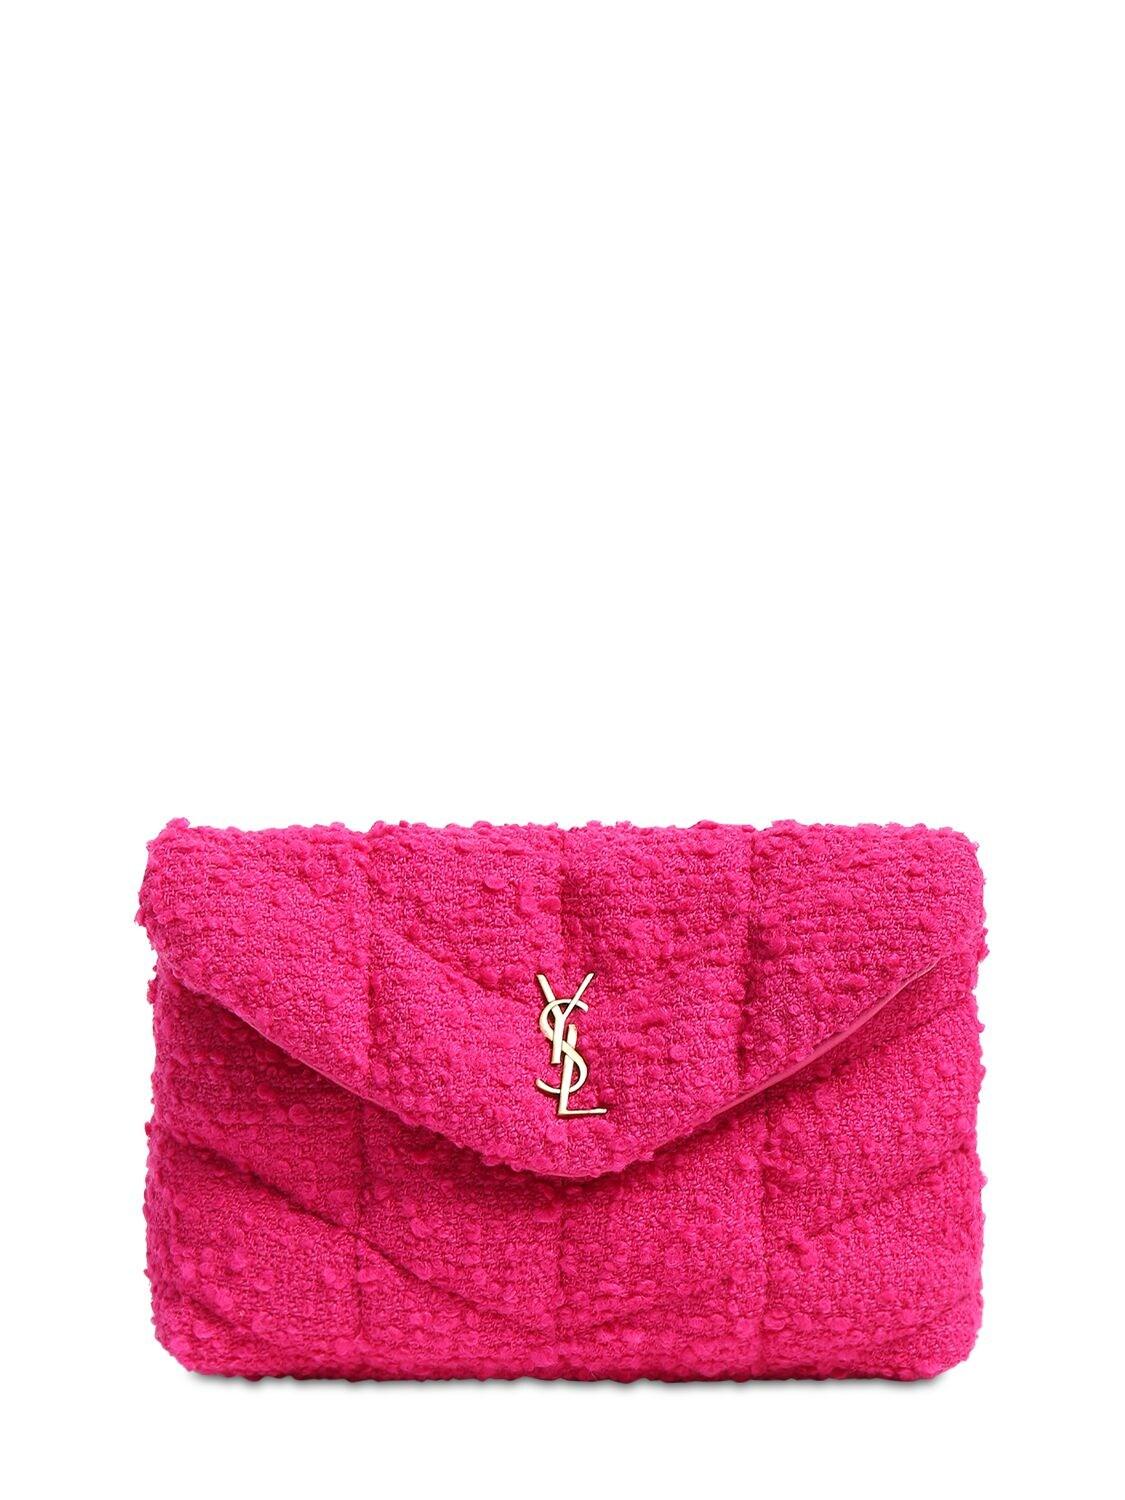 Saint Laurent Pink Loulou Small Puffer Tweed Pouch - New in Box - The  Consignment Cafe